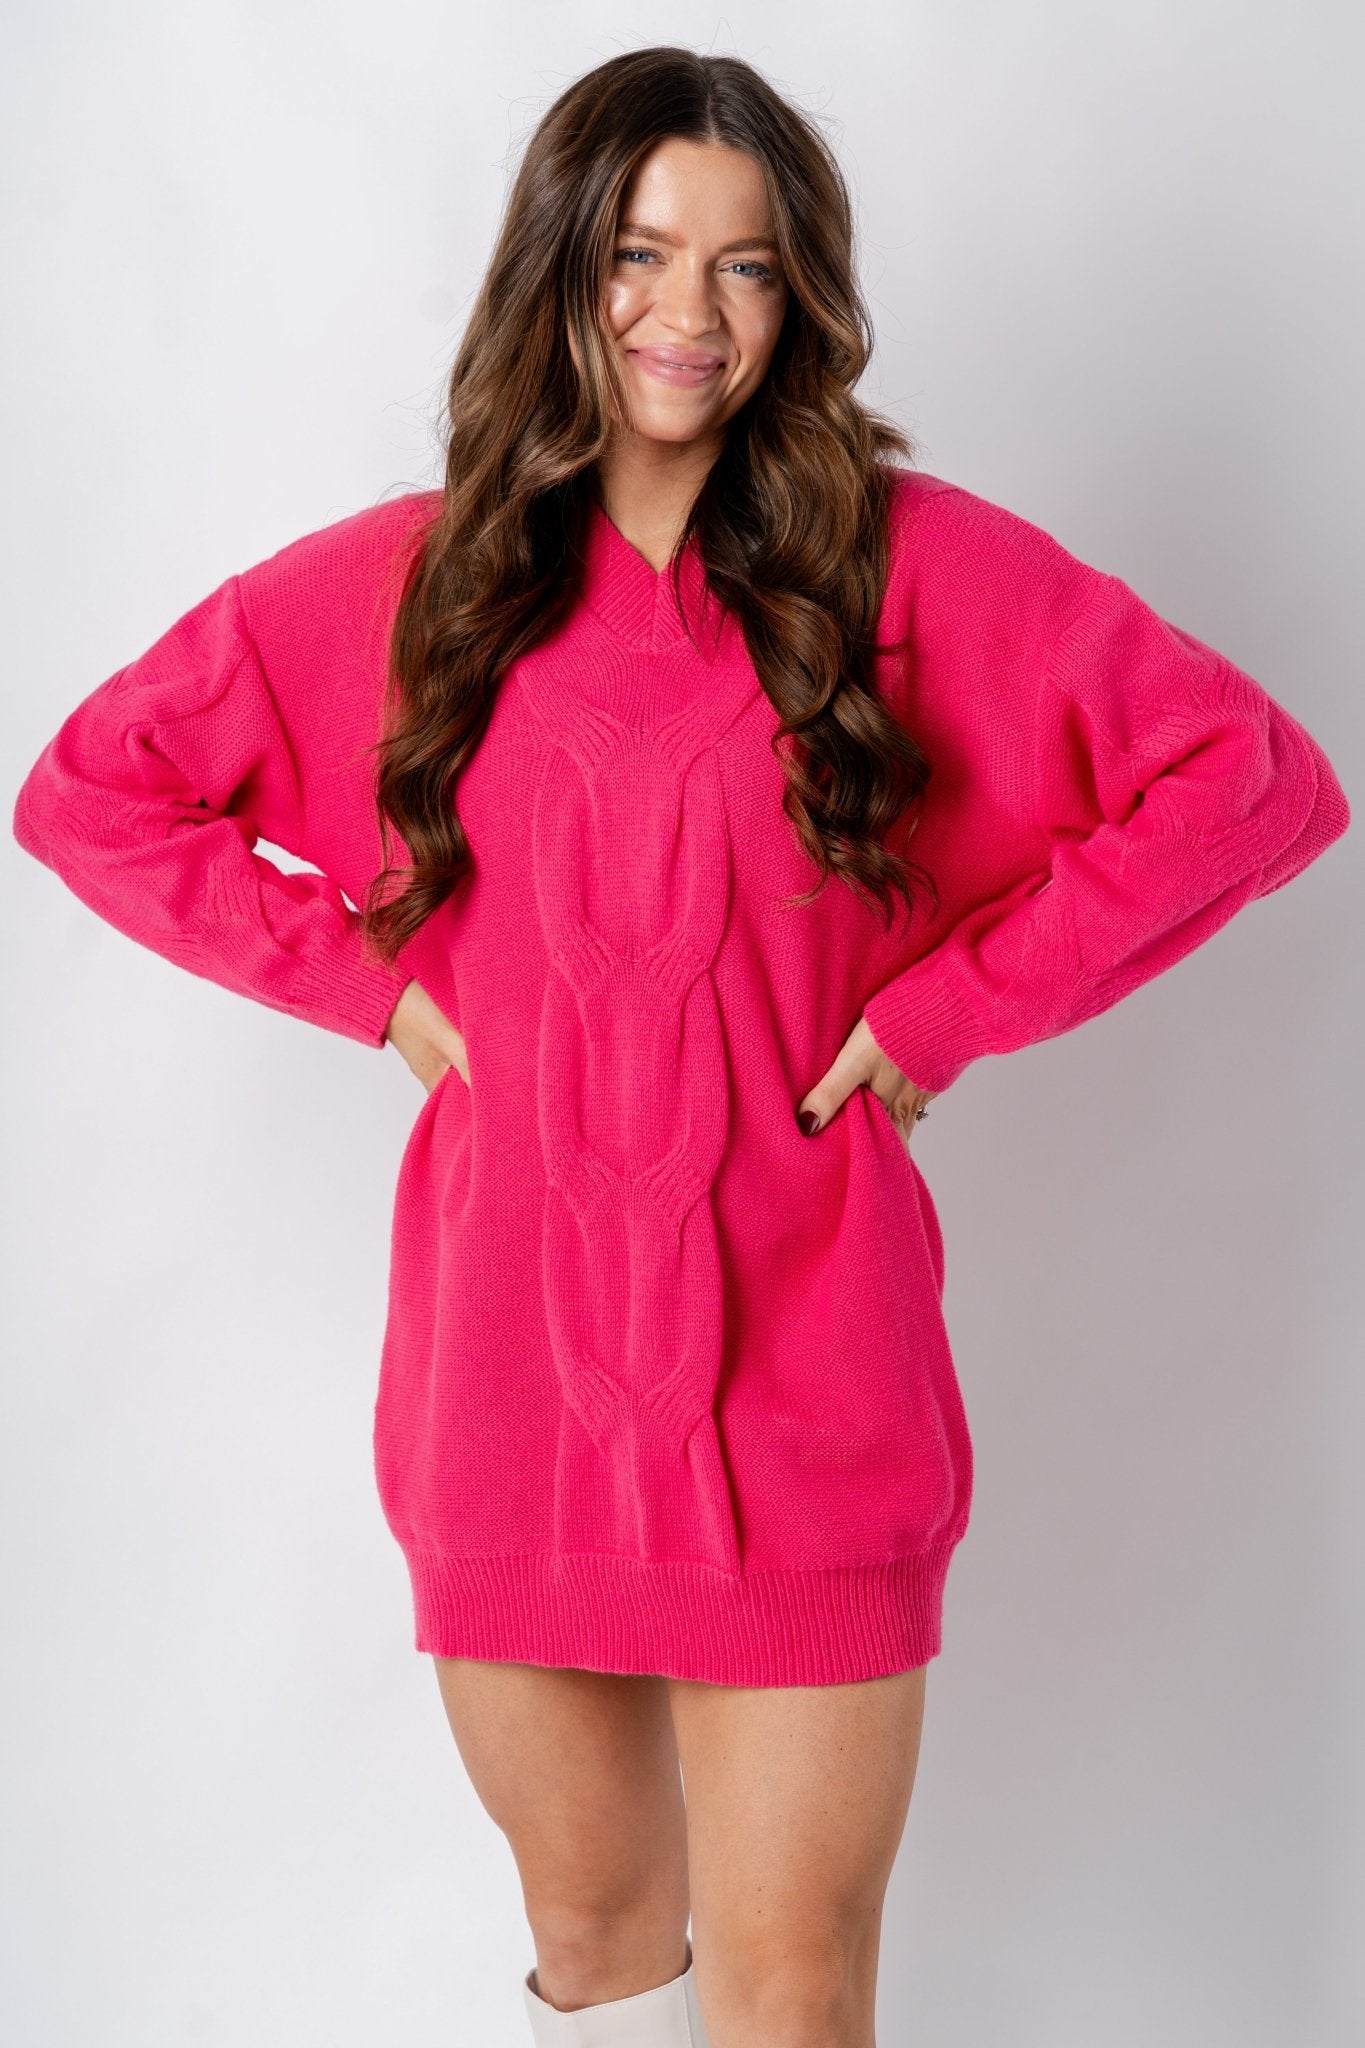 Oversized knit sweater dress fuchsia - Affordable dress - Boutique Dresses at Lush Fashion Lounge Boutique in Oklahoma City